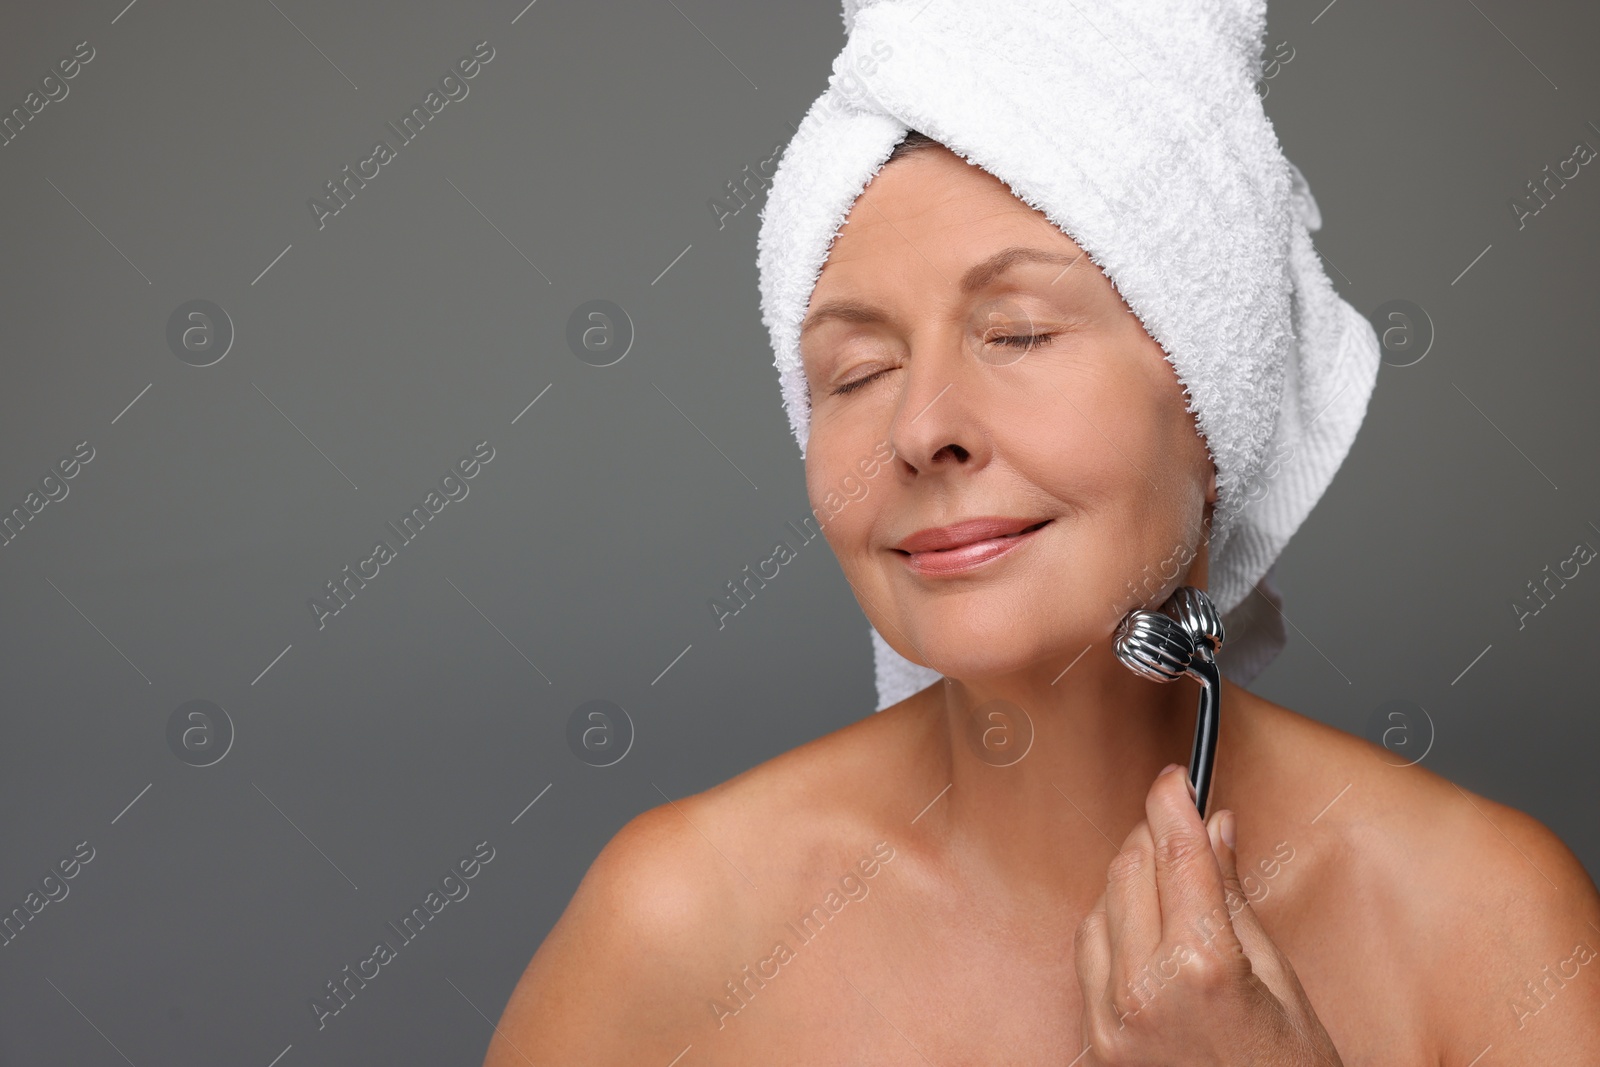 Photo of Woman massaging her face with metal roller on grey background, space for text